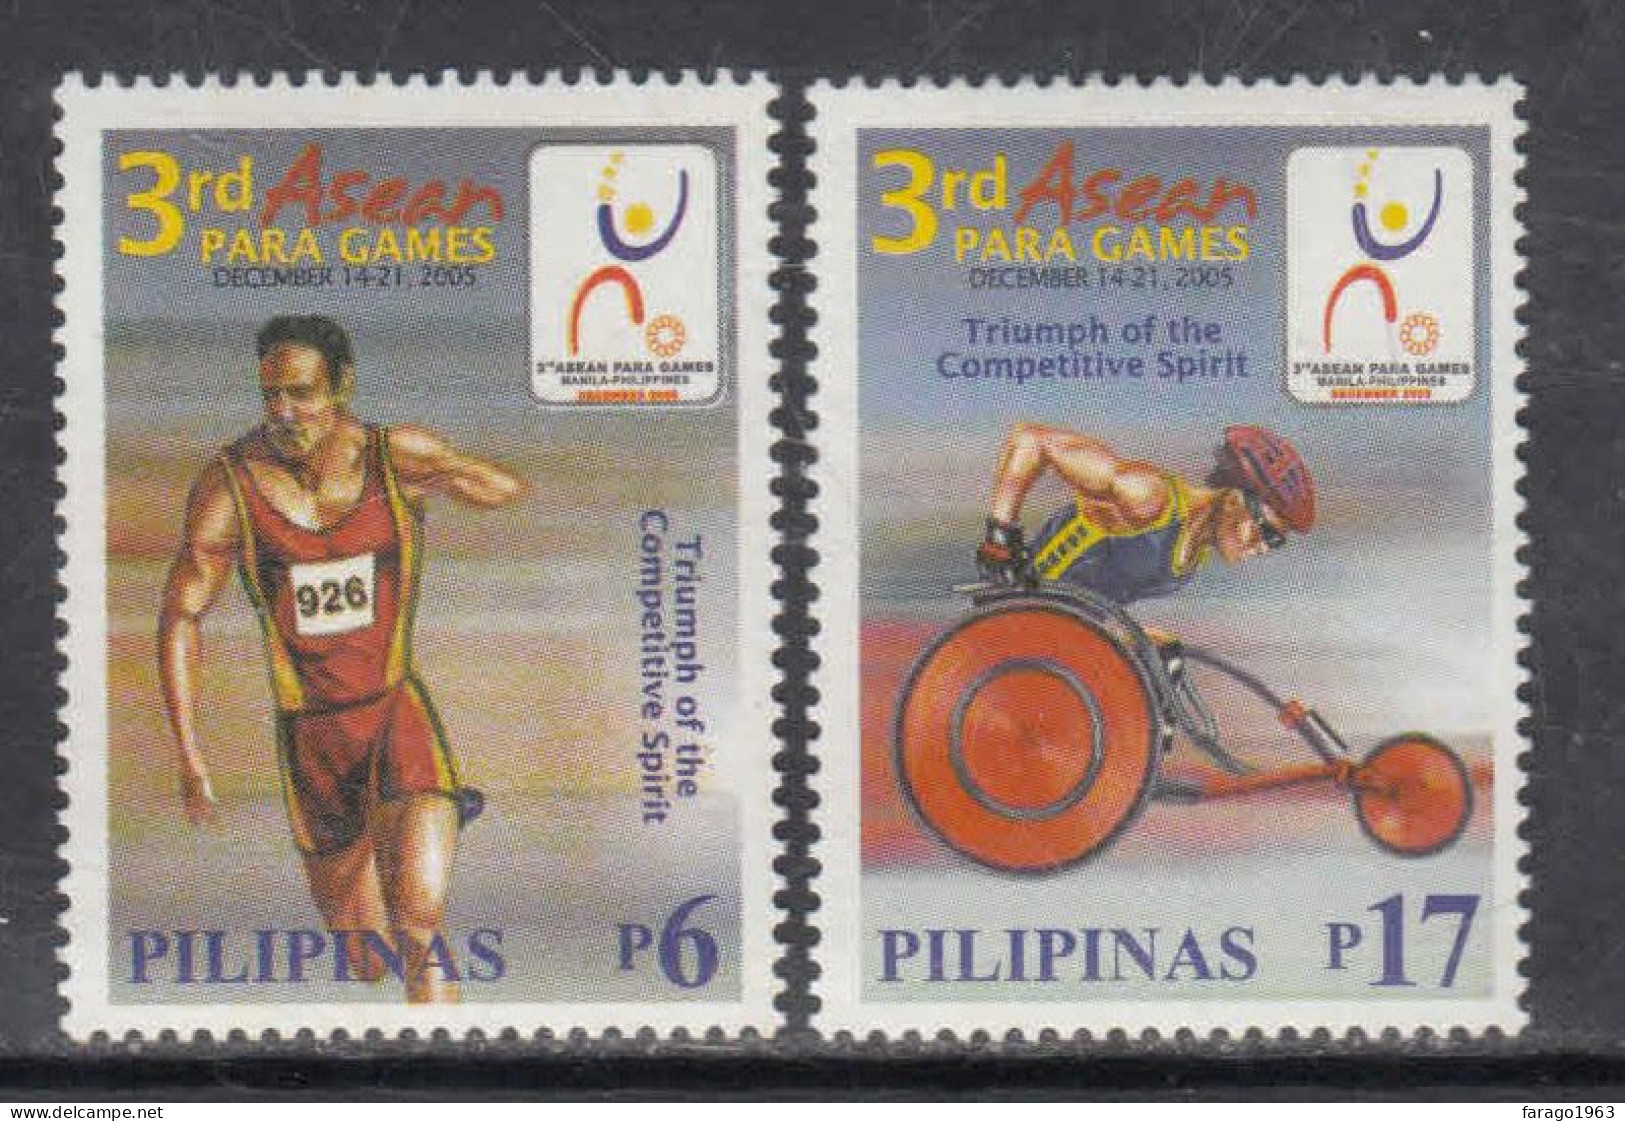 2005 Philippines 3rd PARA Games Complete Set Of 2 MNH - Philippines